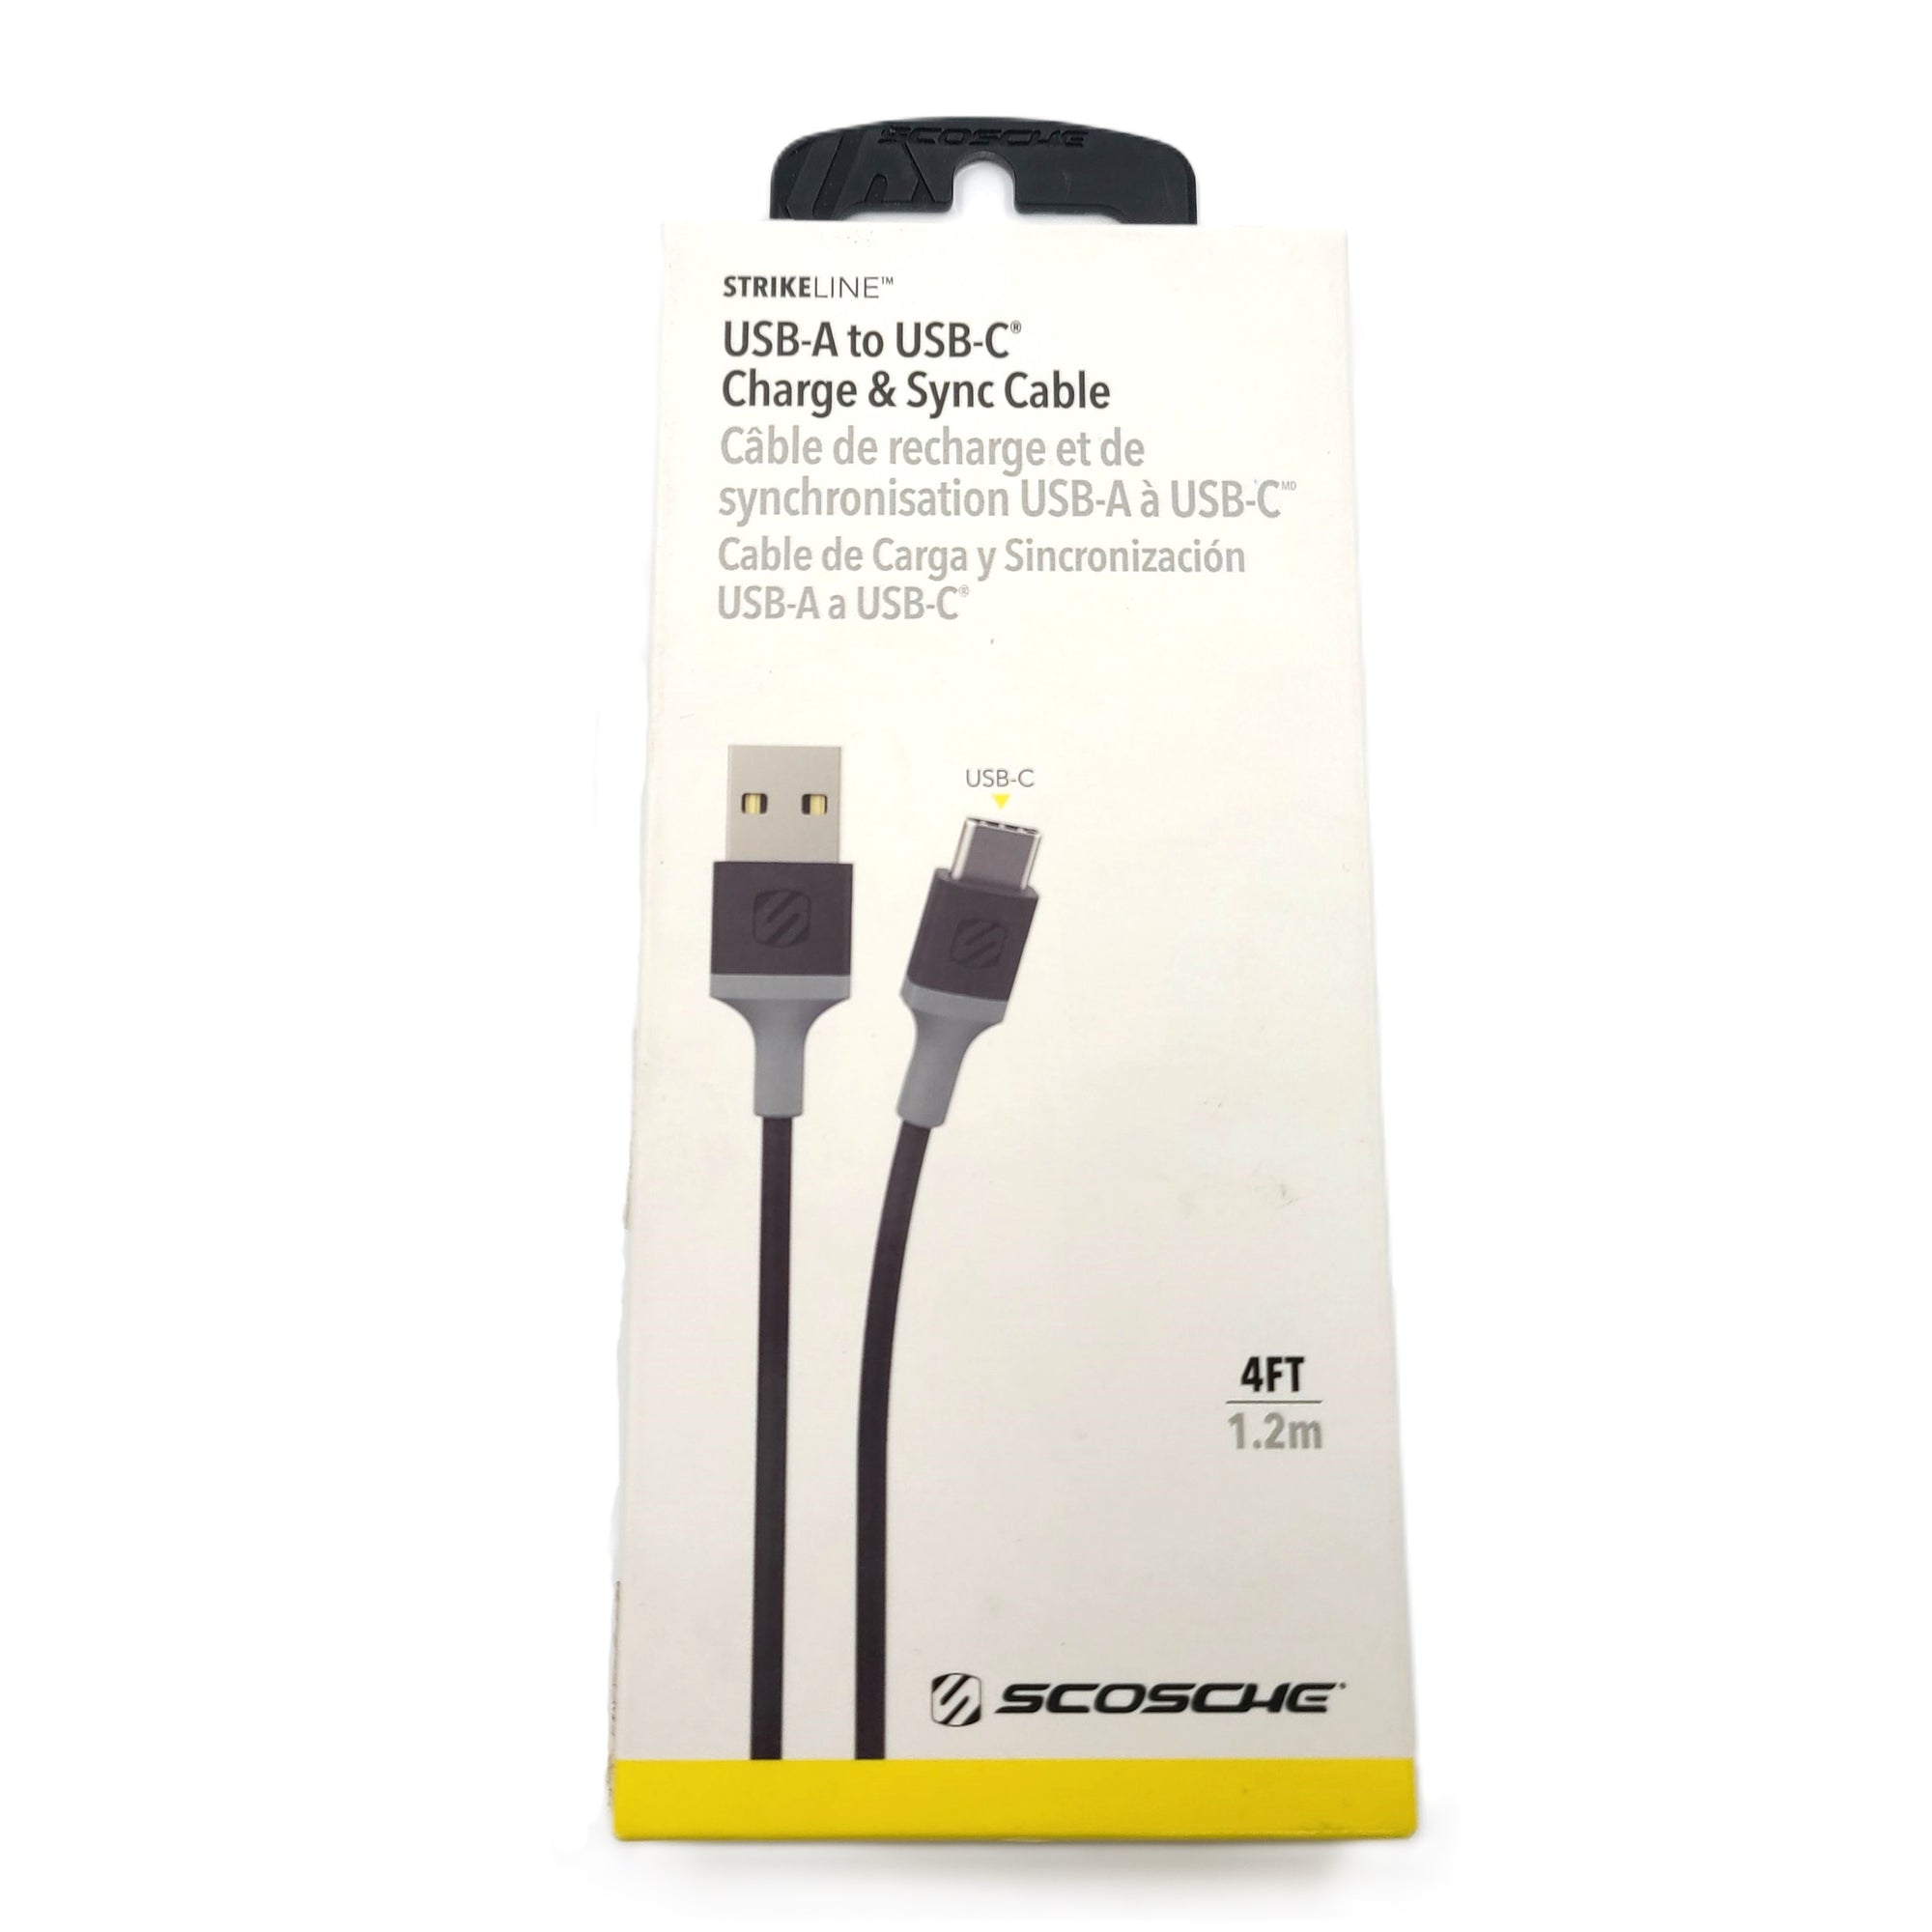 Scosche Strikeline USB-A to USB-C Charge and Sync Cable